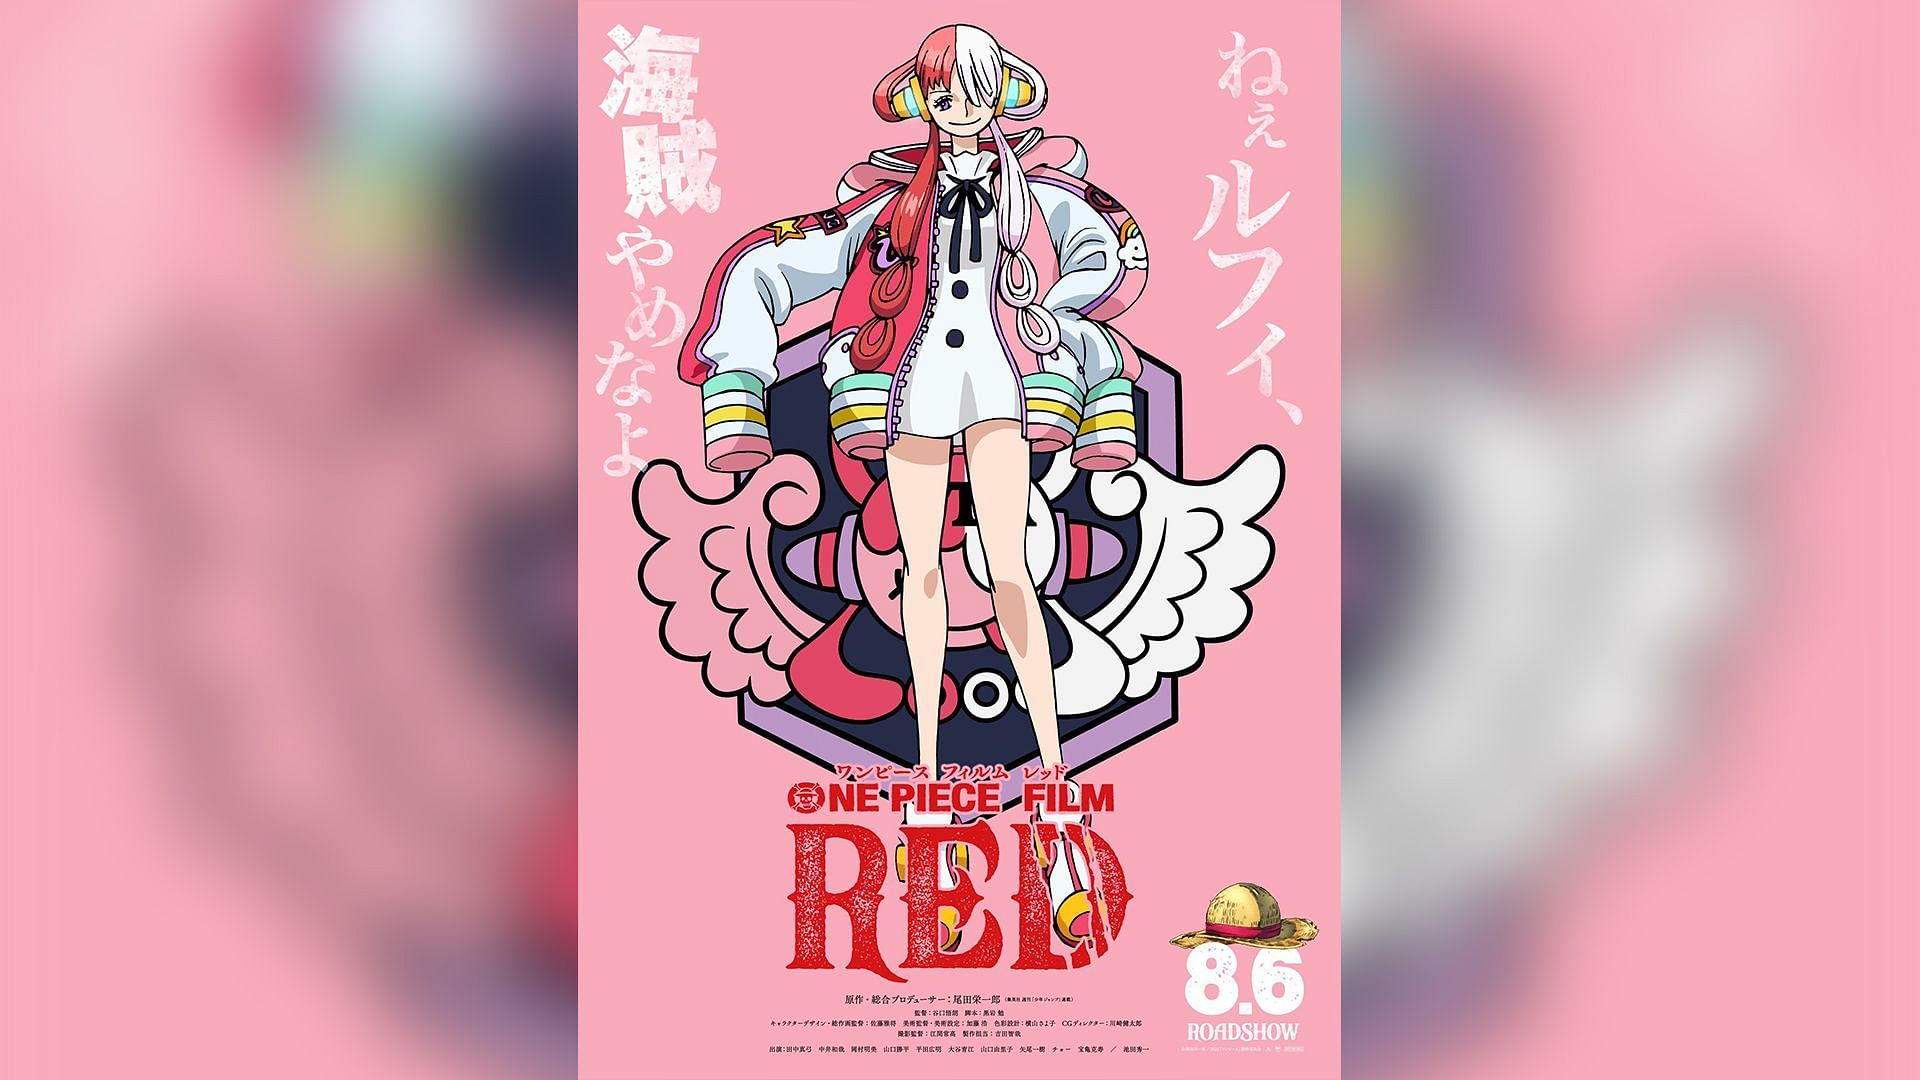 New One Piece Red film poster, featuring a mysterious woman (Image via Eiichiro Oda)